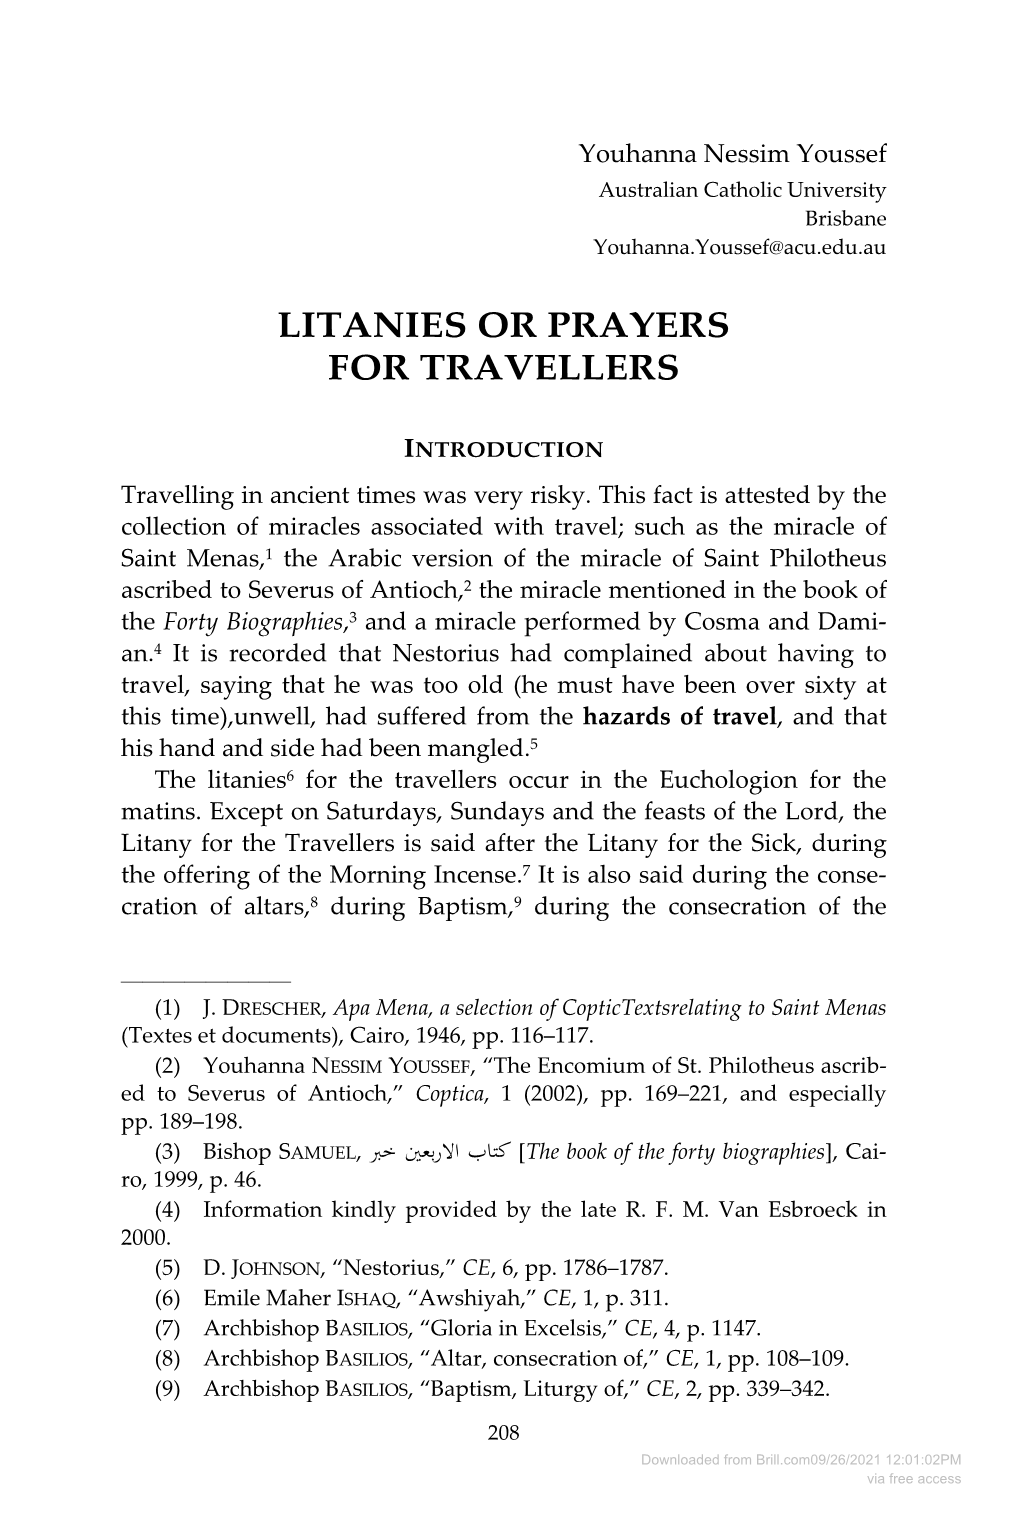 Litanies Or Prayers for Travellers